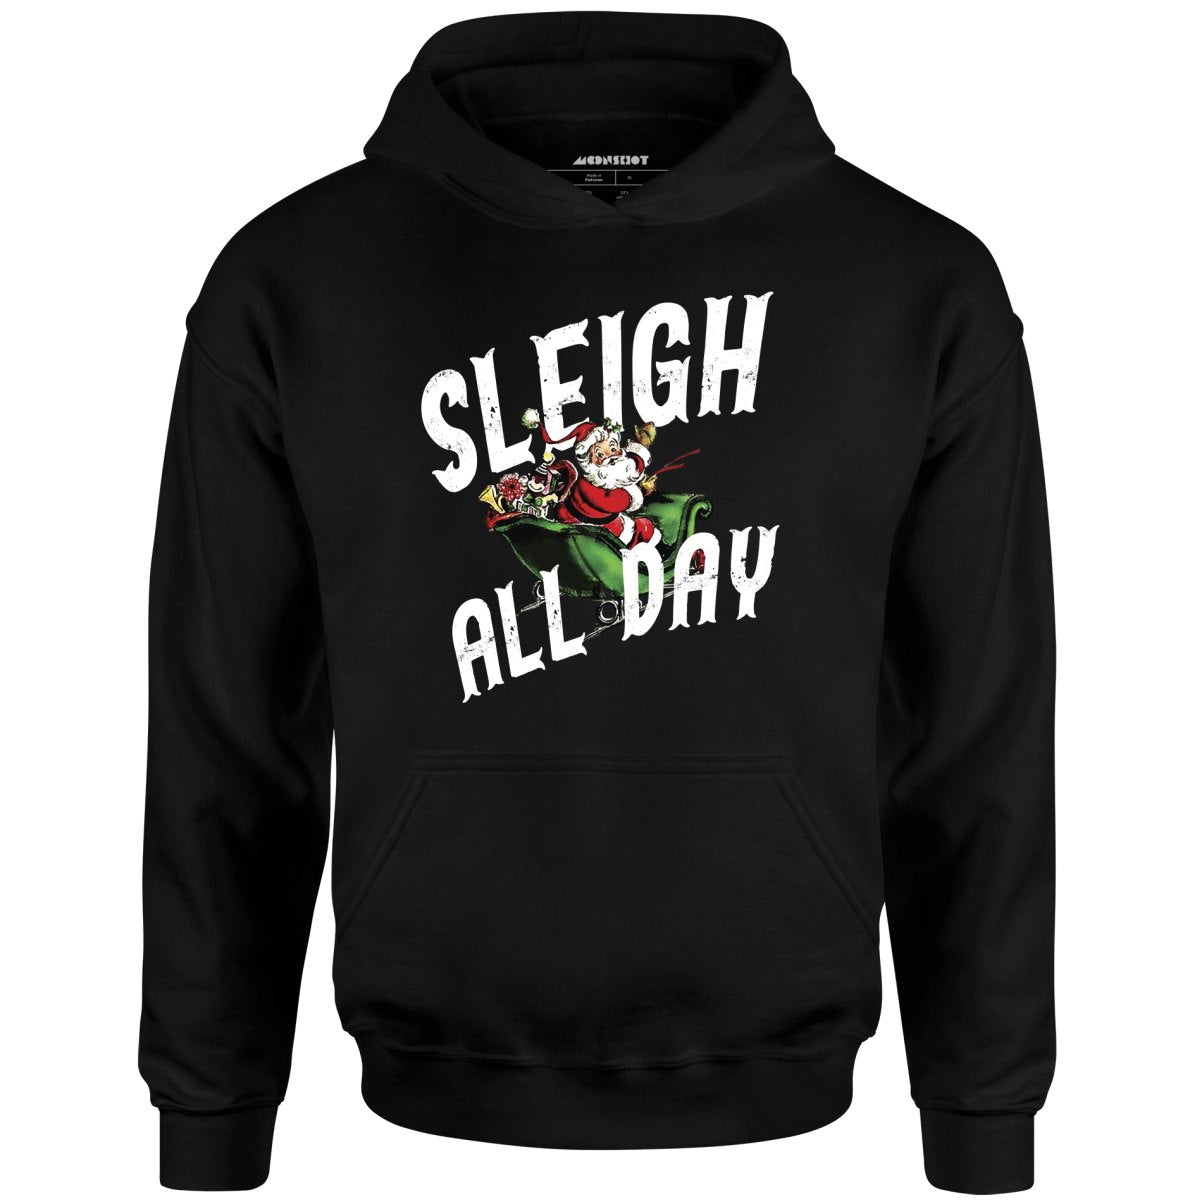 Sleigh All Day - Unisex Hoodie